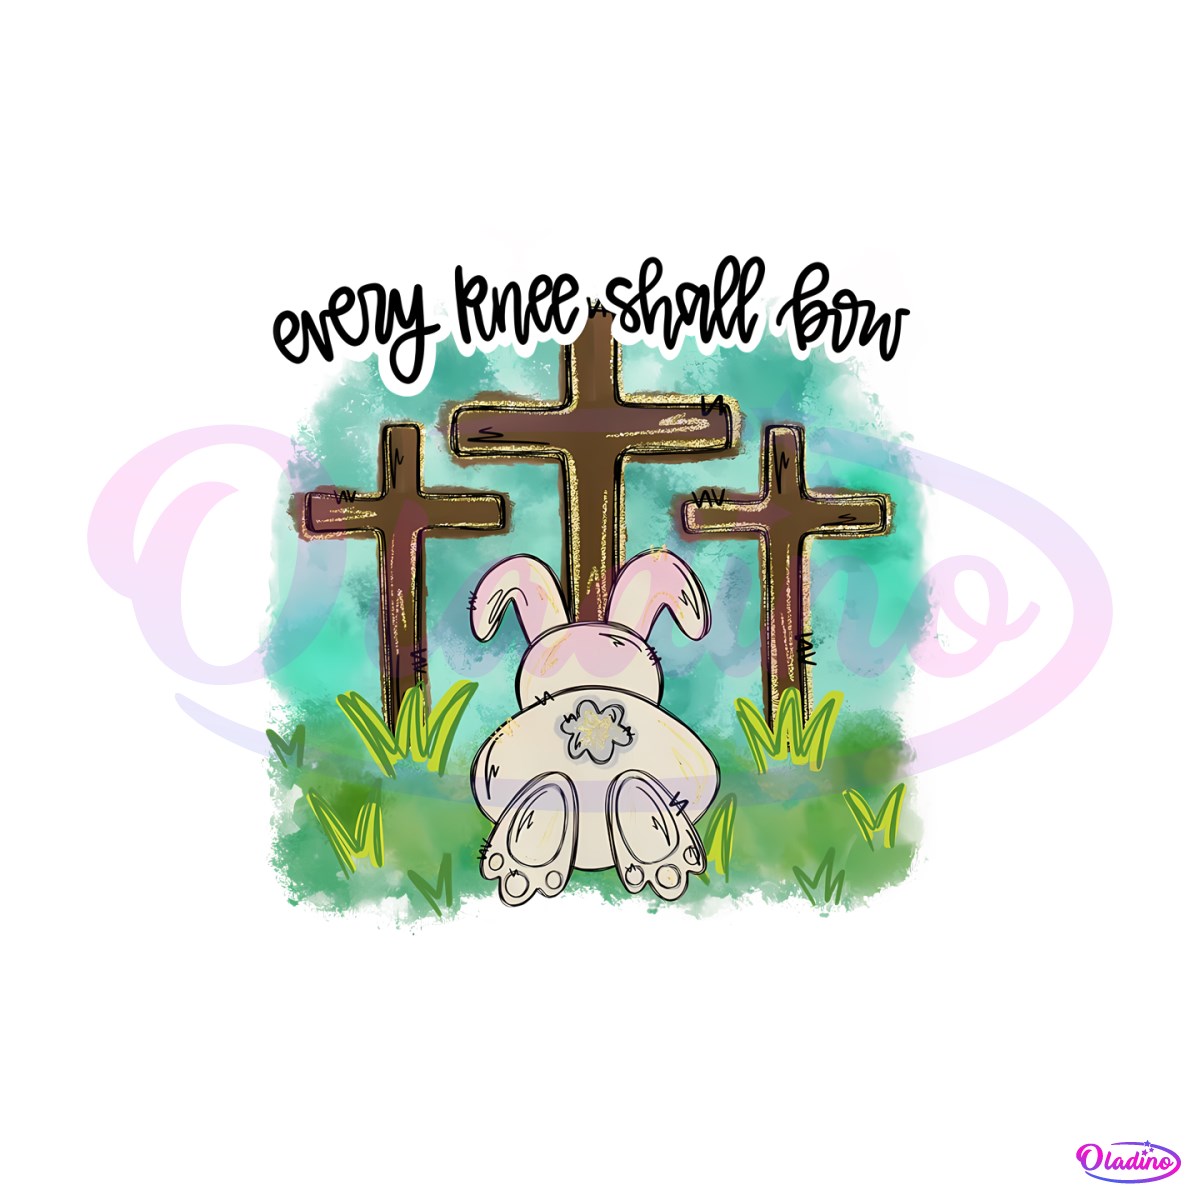 every-knee-shall-bow-bunny-easter-png